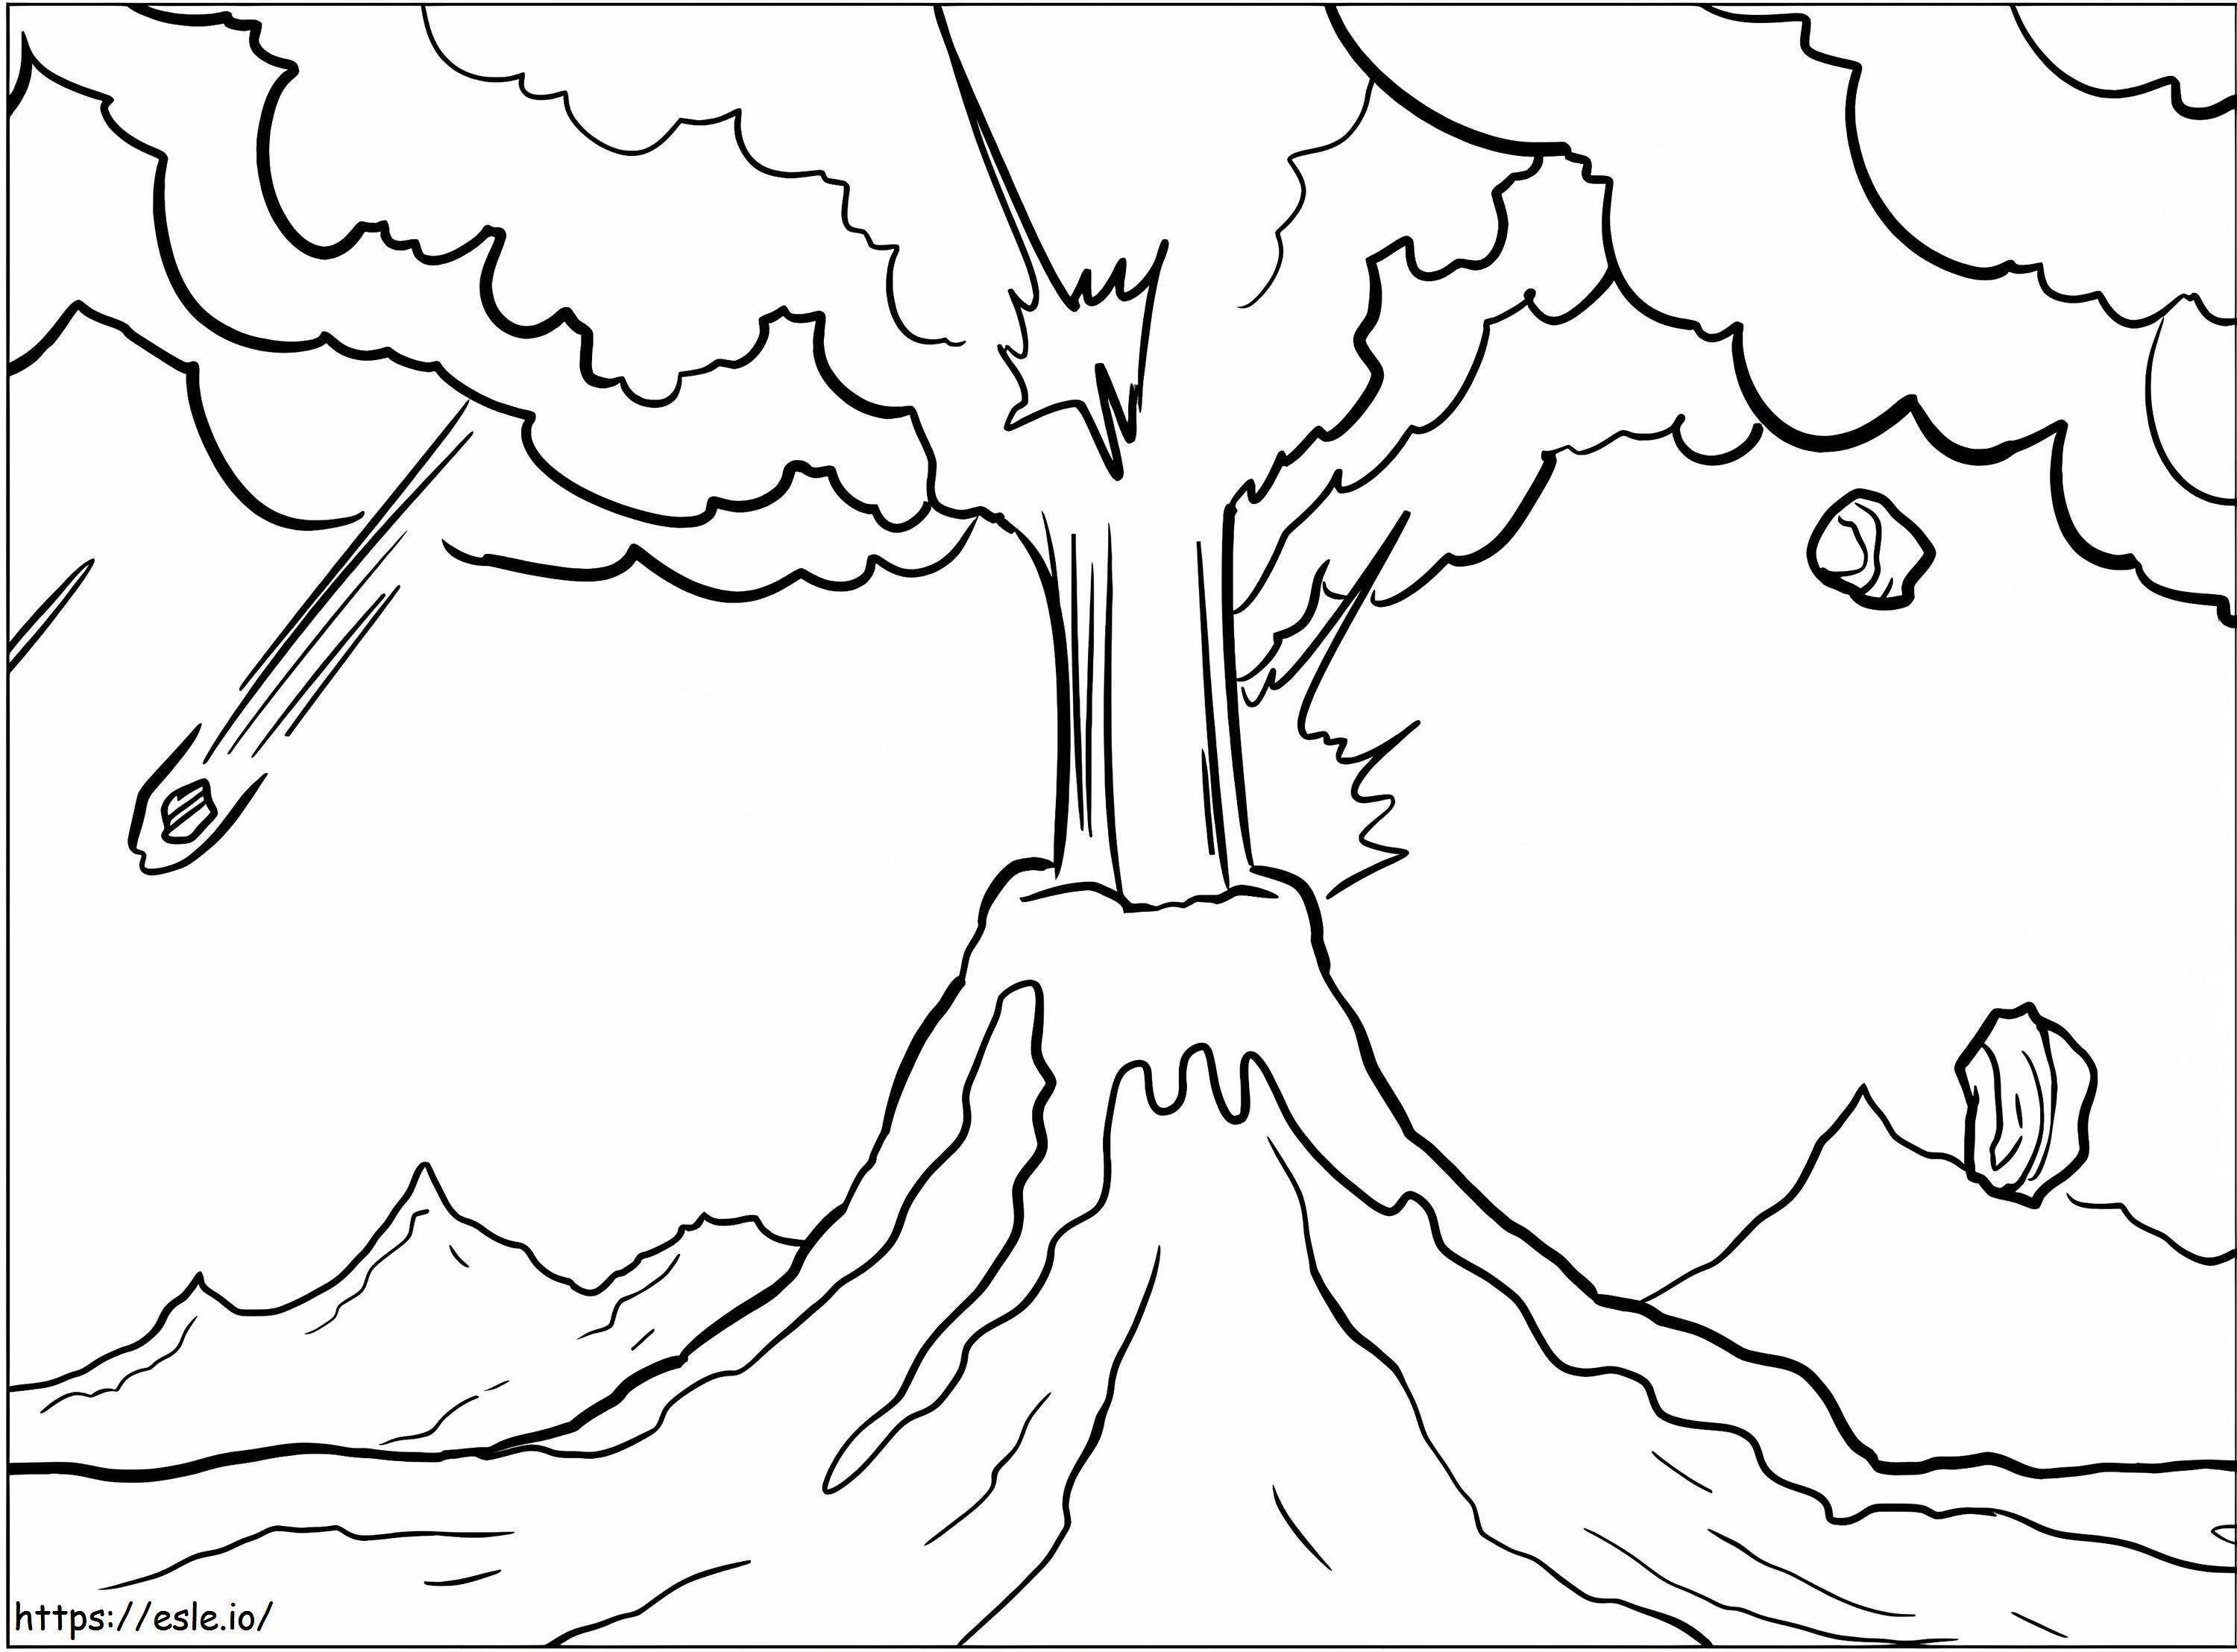 Volcano 7 coloring page